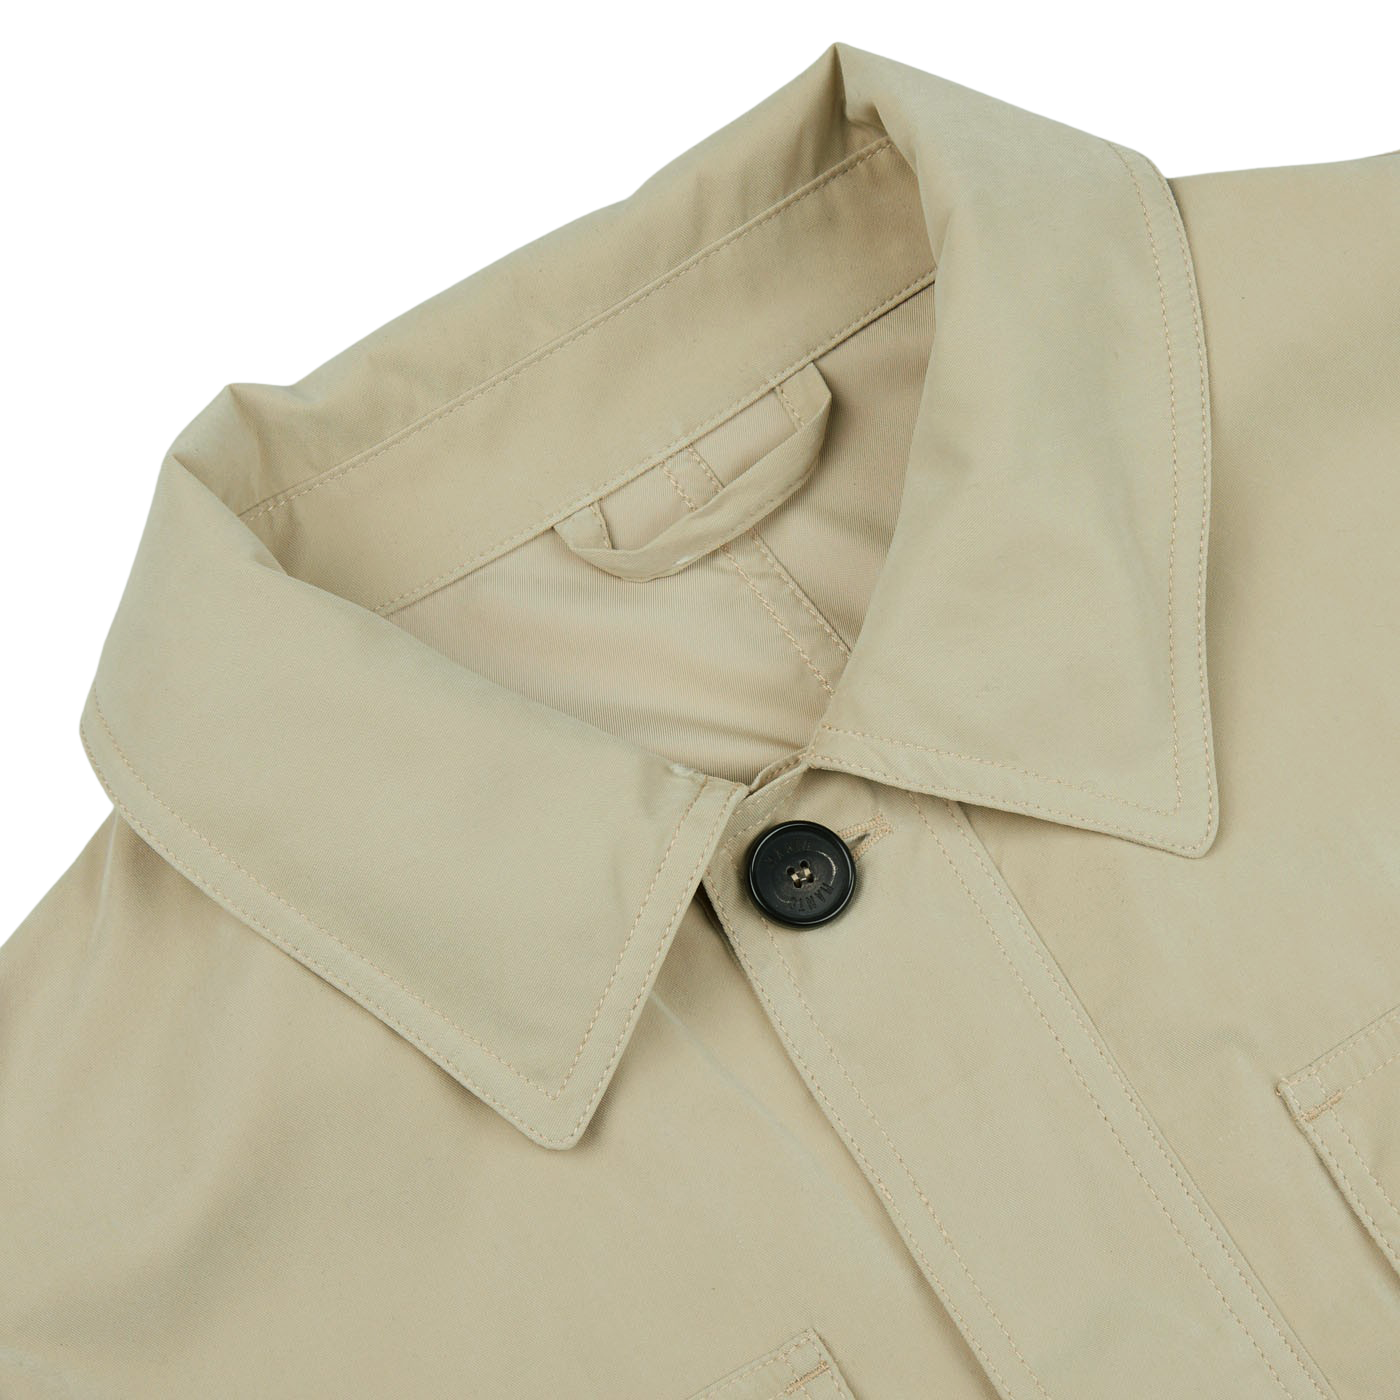 A Khaki Beige Ultrafine Microfiber Safari Jacket by Manto, wind and water-resistant, in a slim fit with buttons.